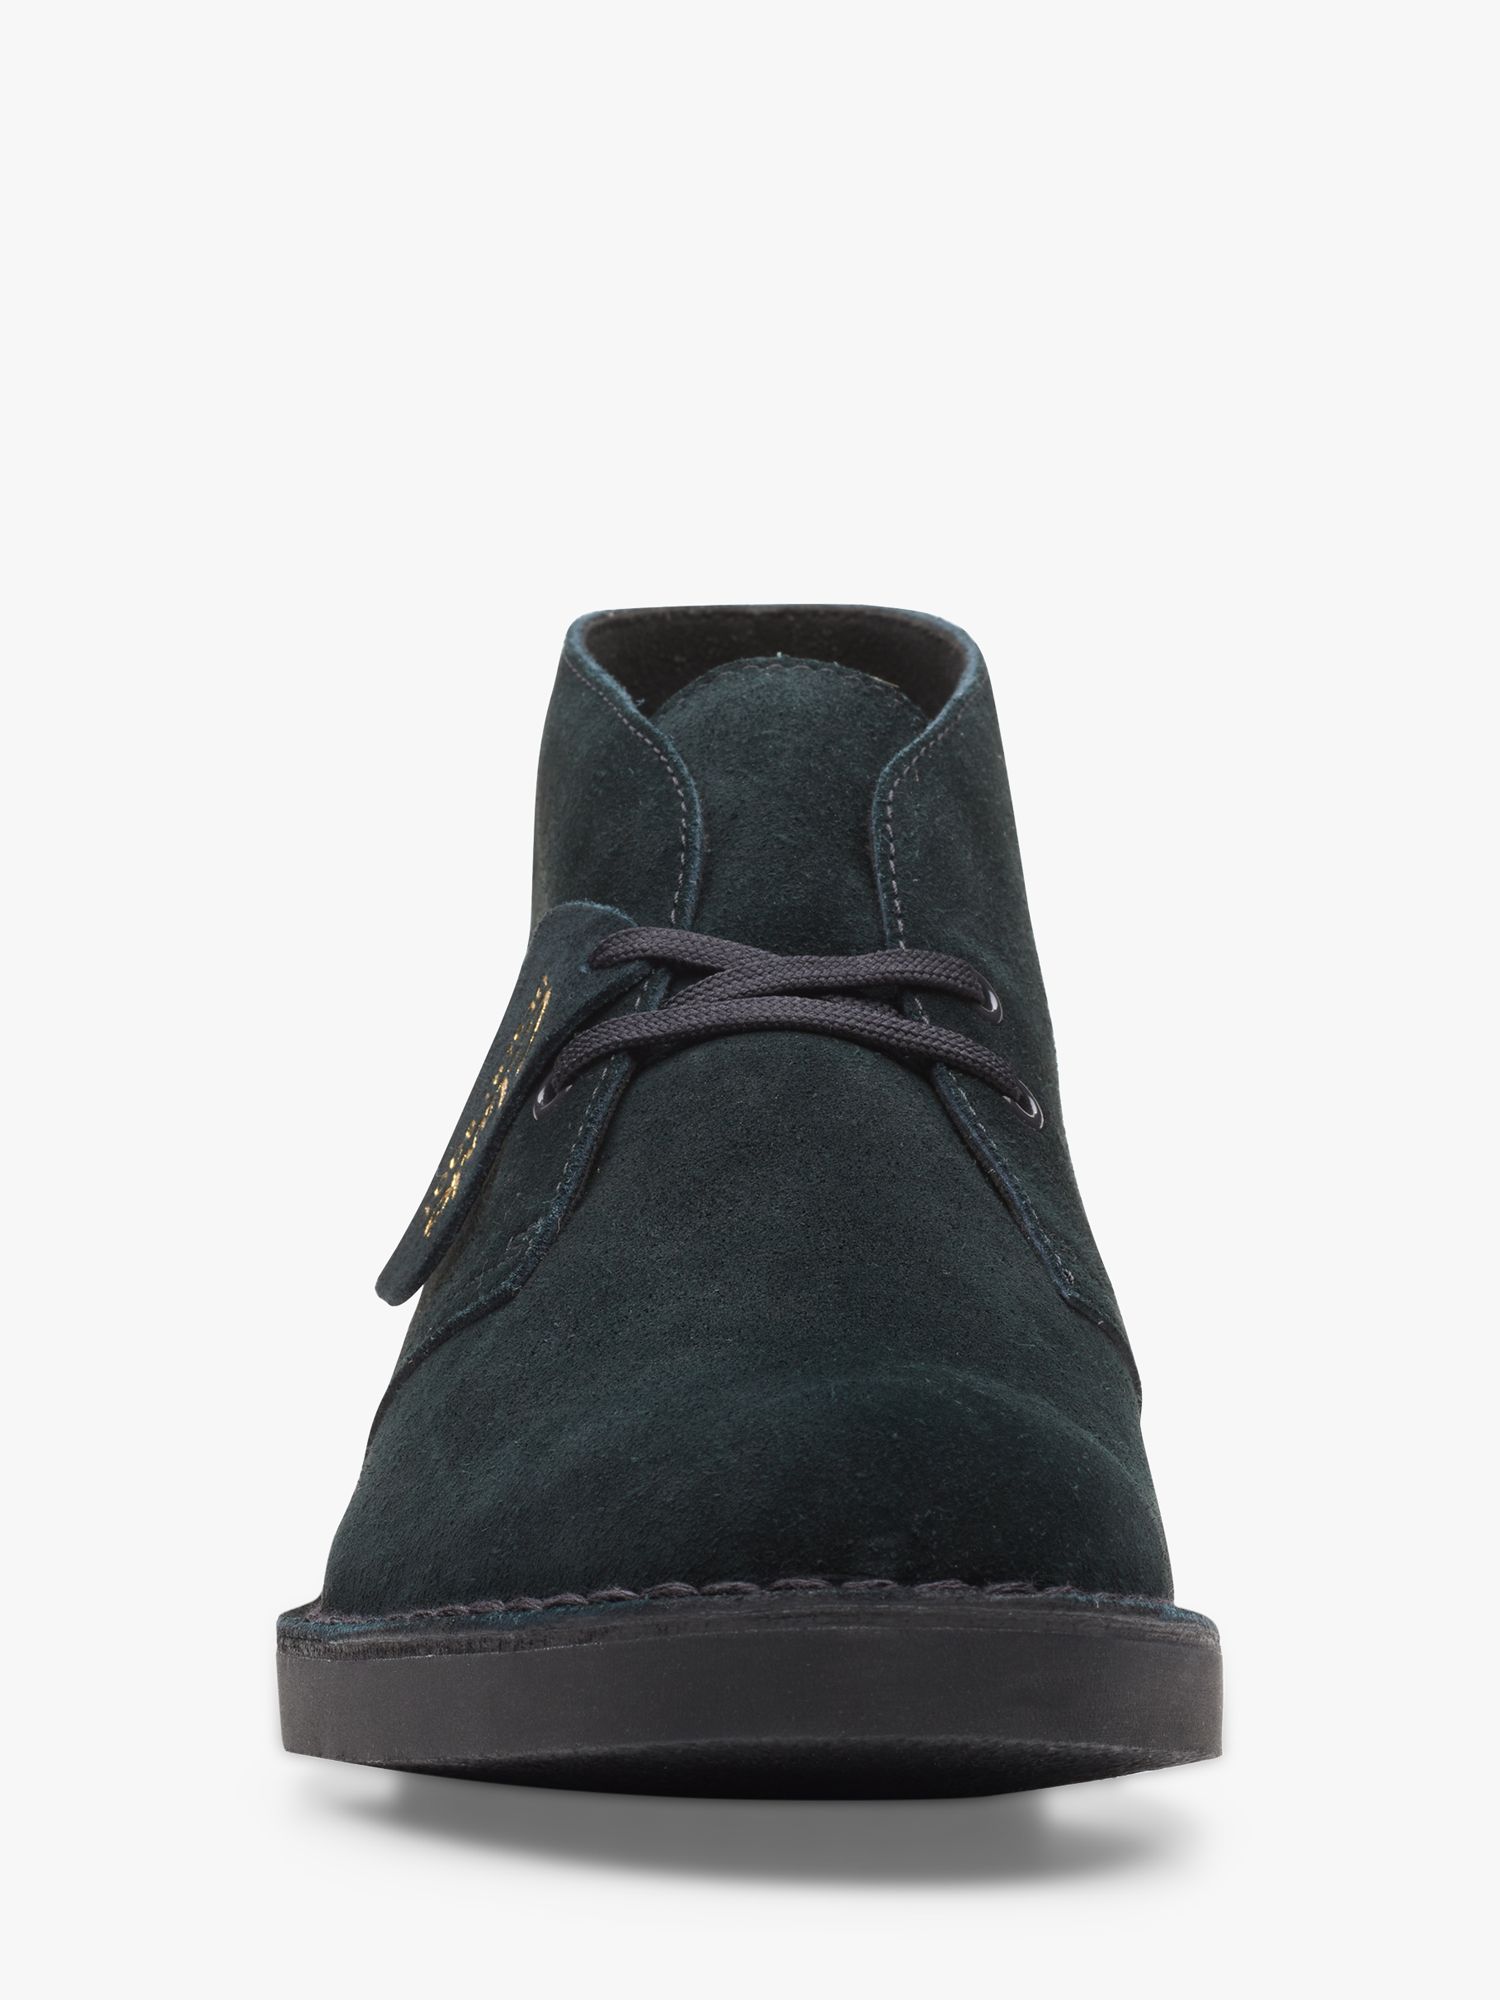 Clarks Evo Suede Boots at John &